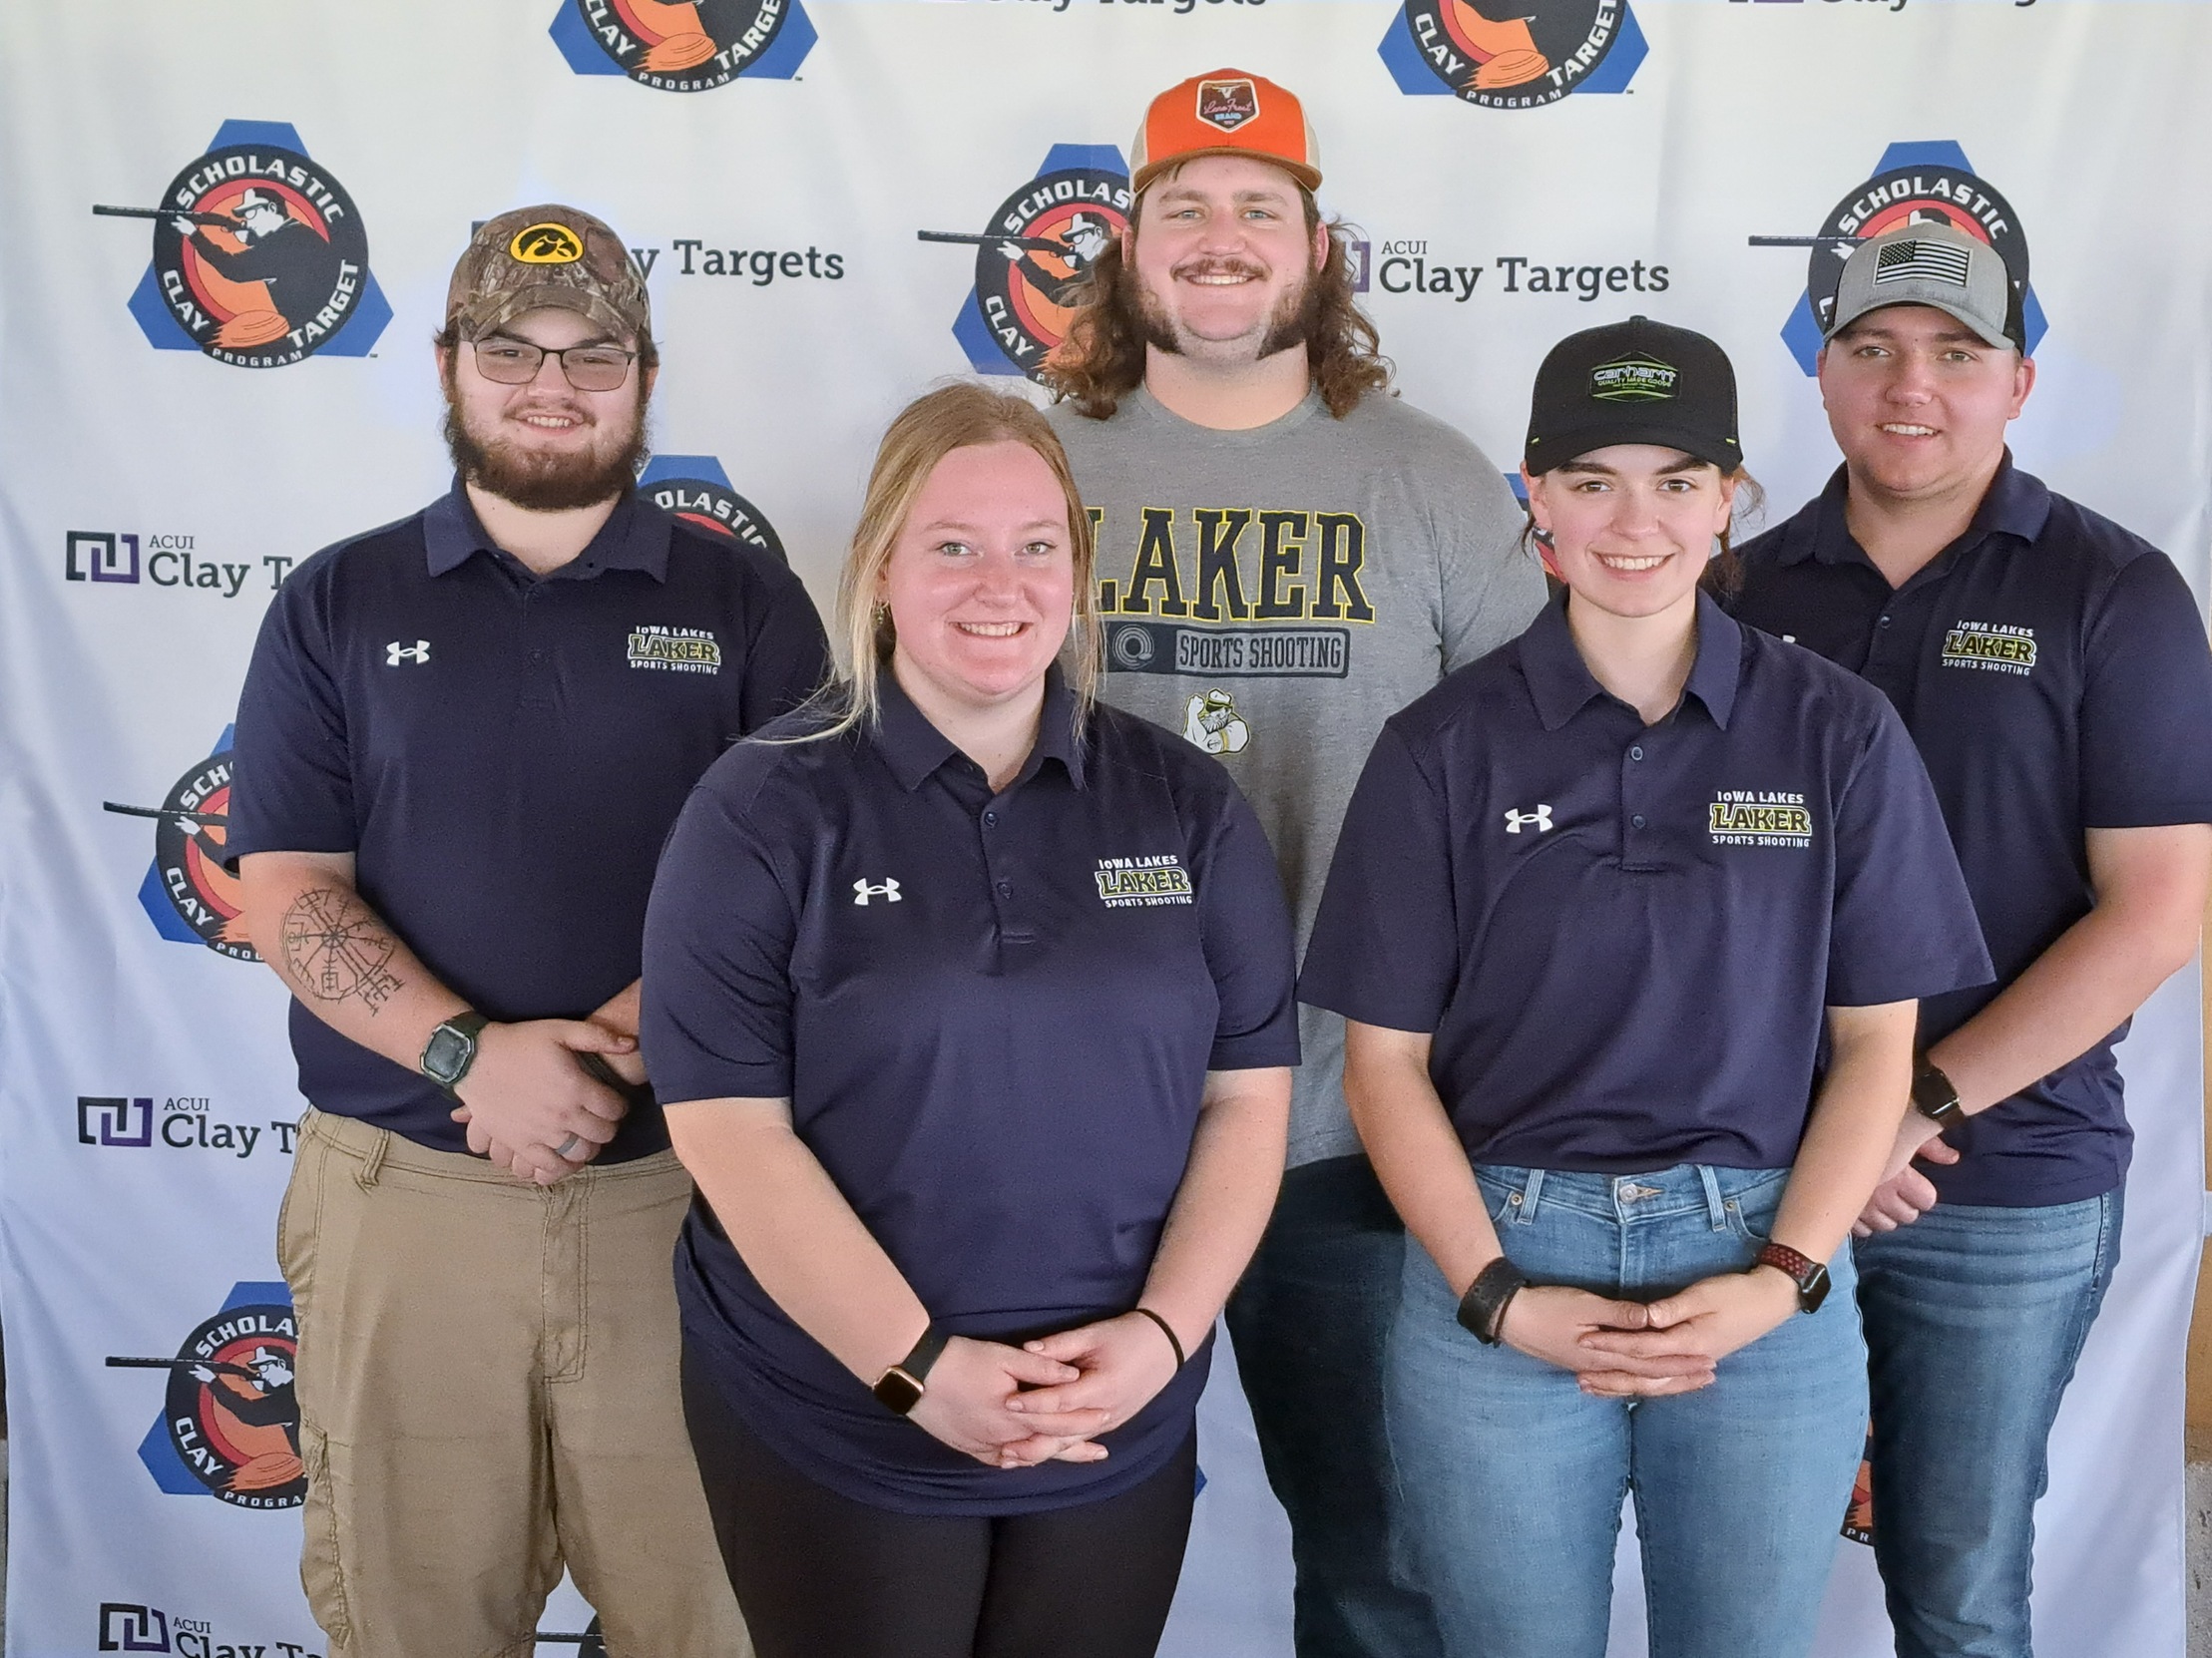 Lakers place 4th in American Trap Doubles and 6th in American Trap Singles at the 2023 ACUI College Nationals